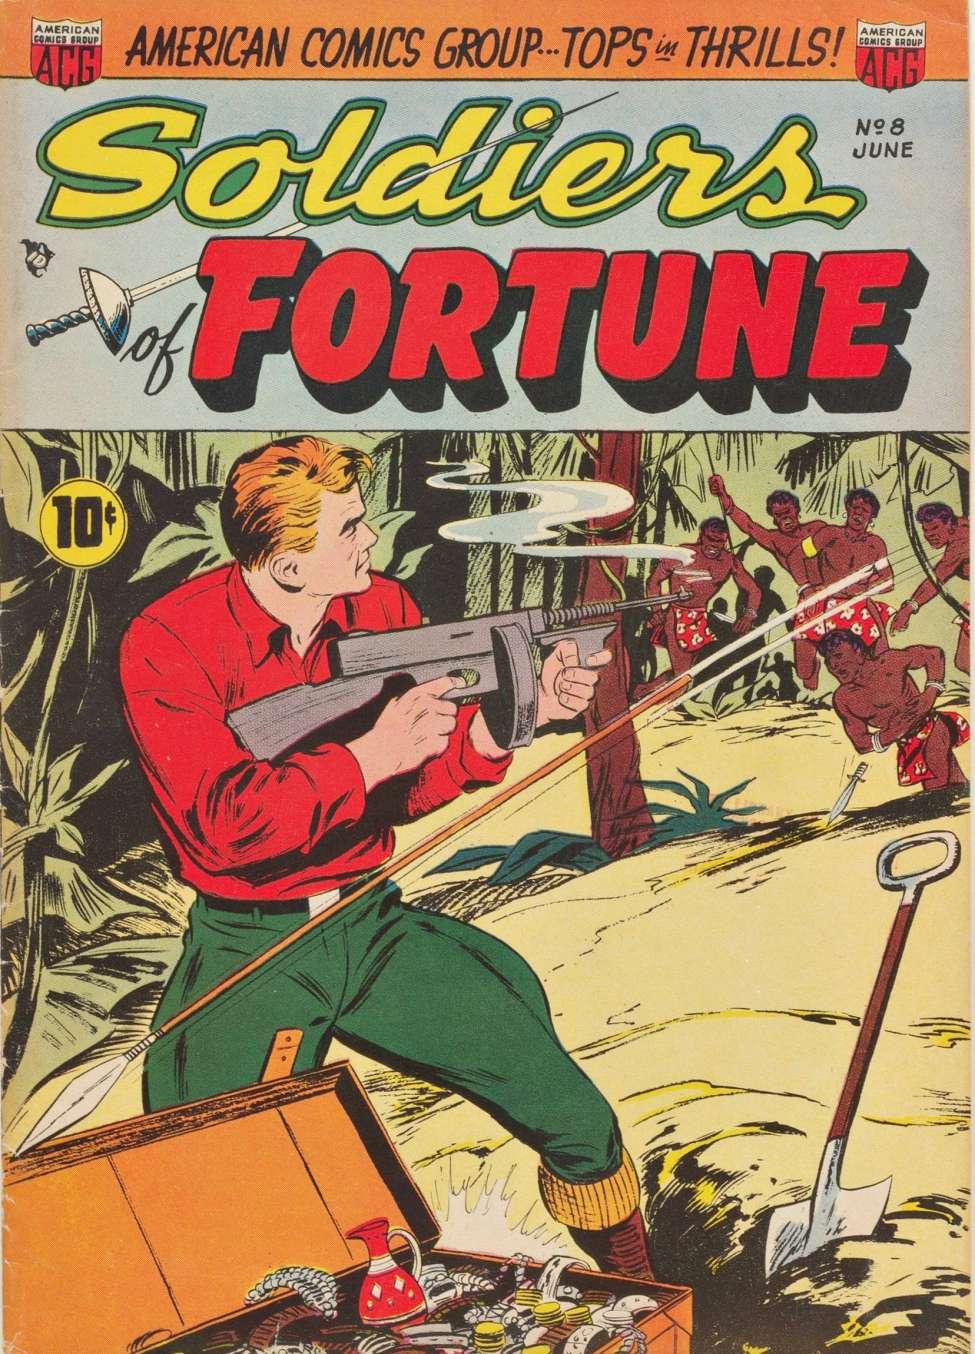 Comic Book Cover For Soldiers of Fortune 8